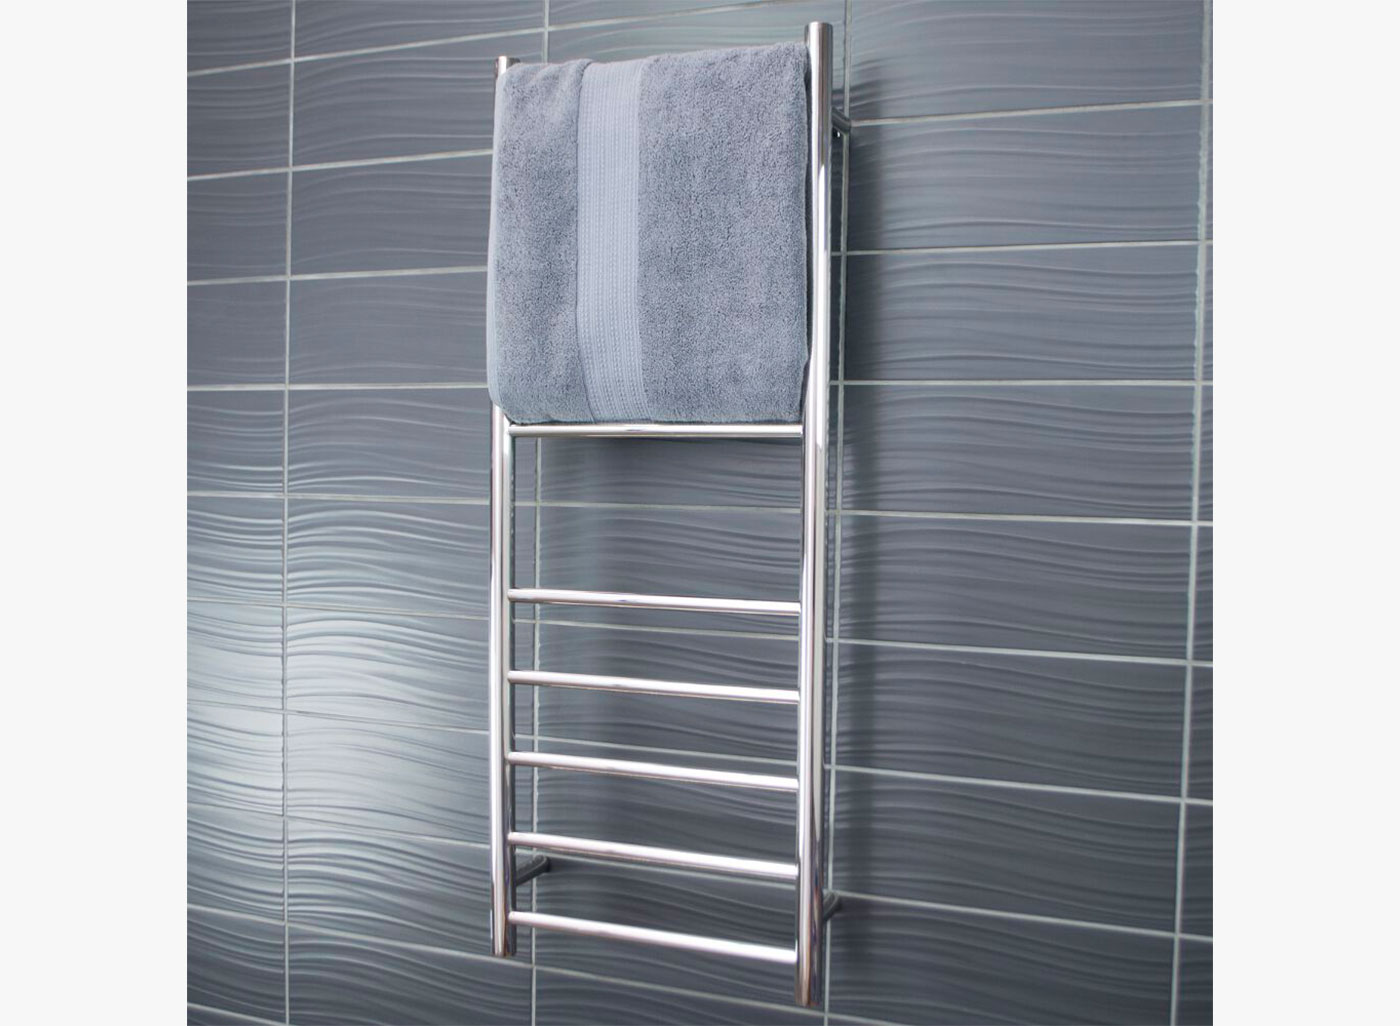 including round bar and square bar models. these towel rails are a quality addition to any bathroom and are easy to install as there is no electrical wiring required.